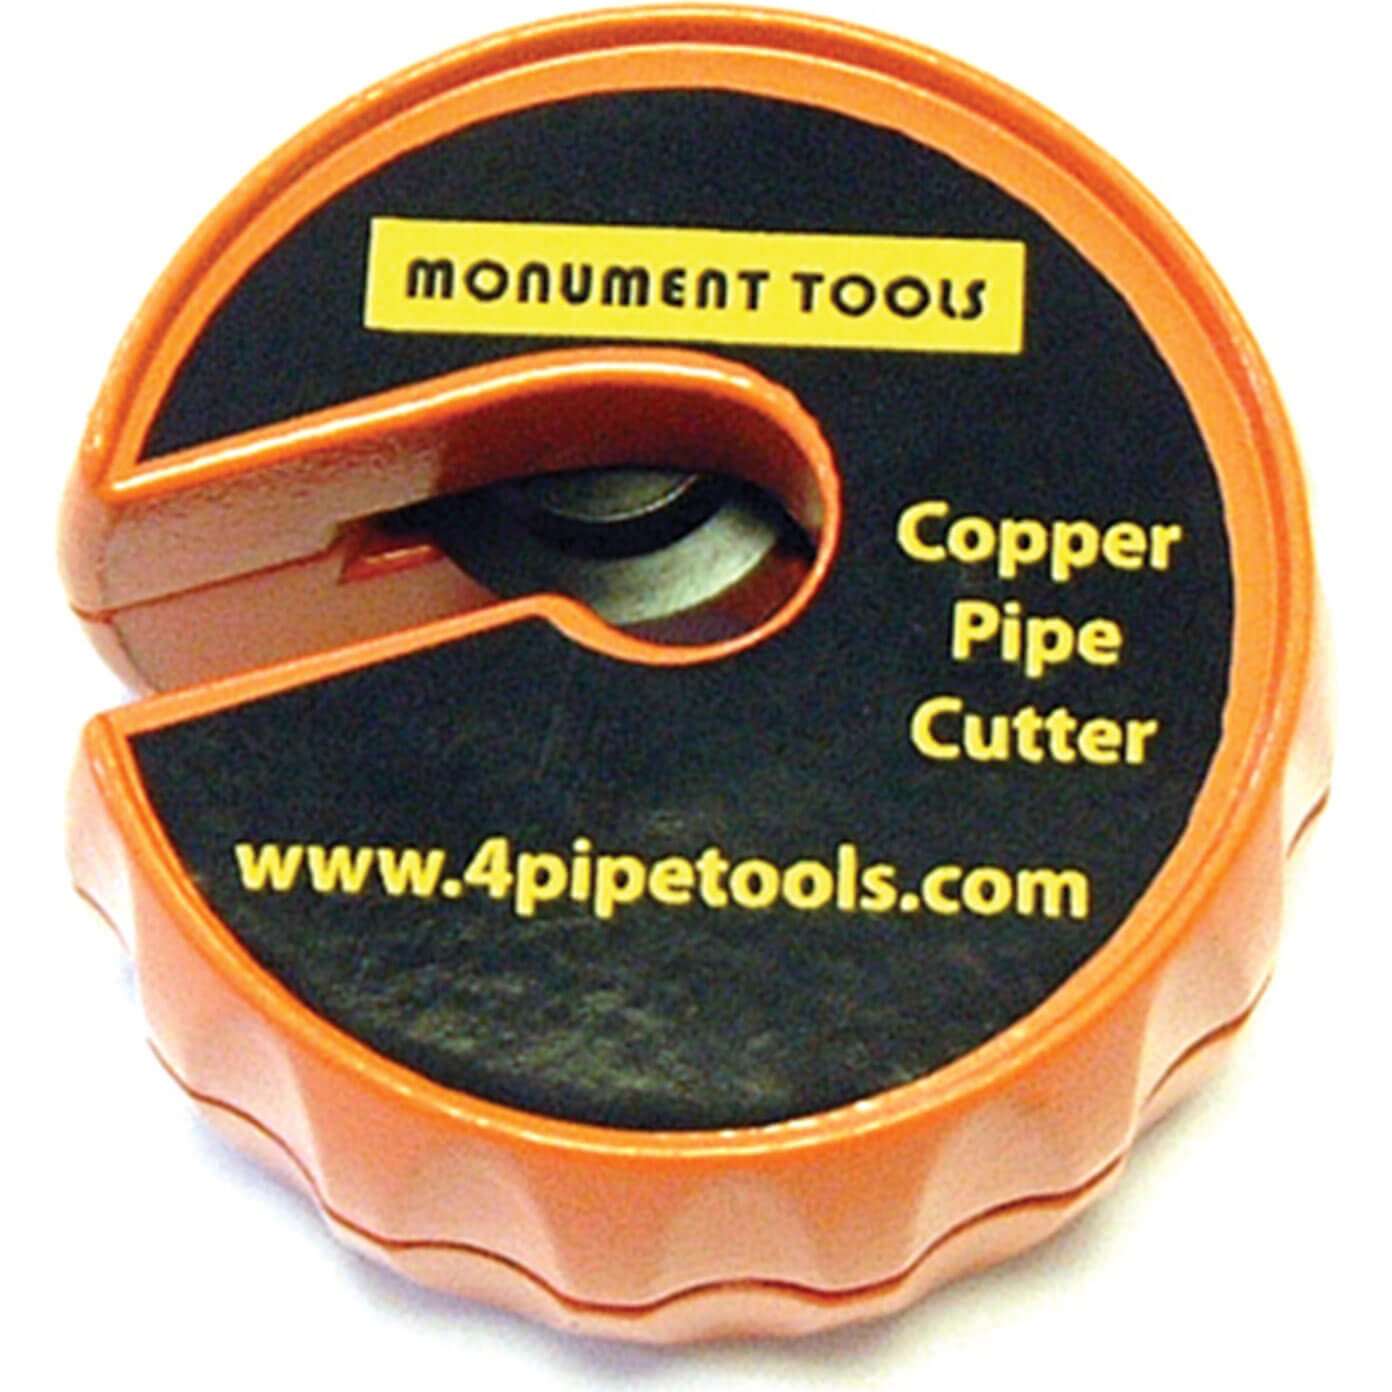 Image of Monument Trade Copper Pipe Cutter 6mm